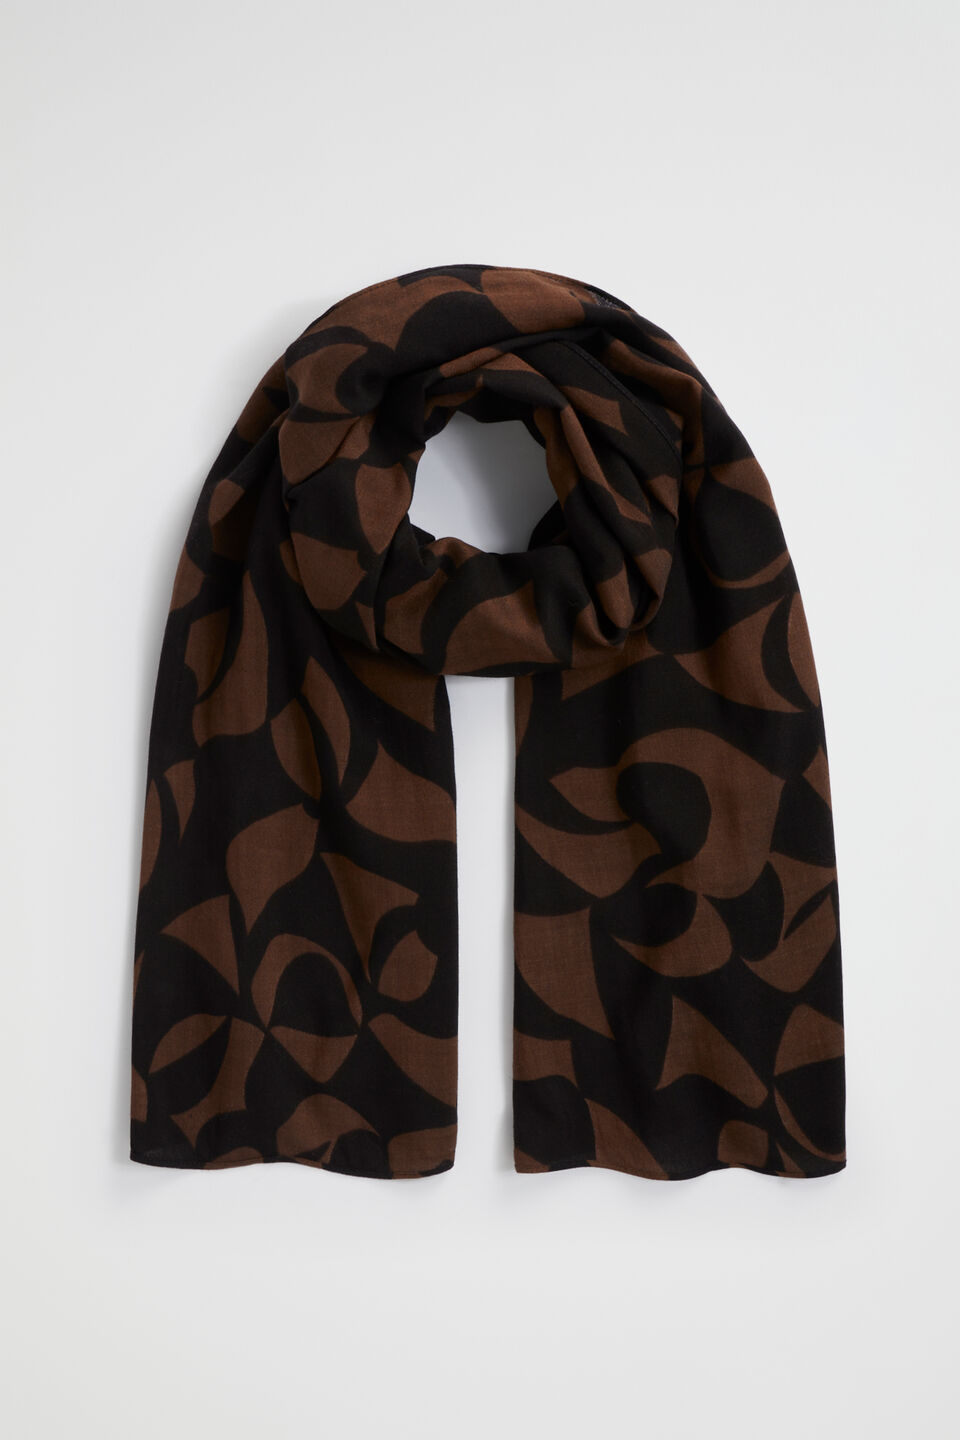 Abstract Print Scarf  Hot Chocolate Abstract